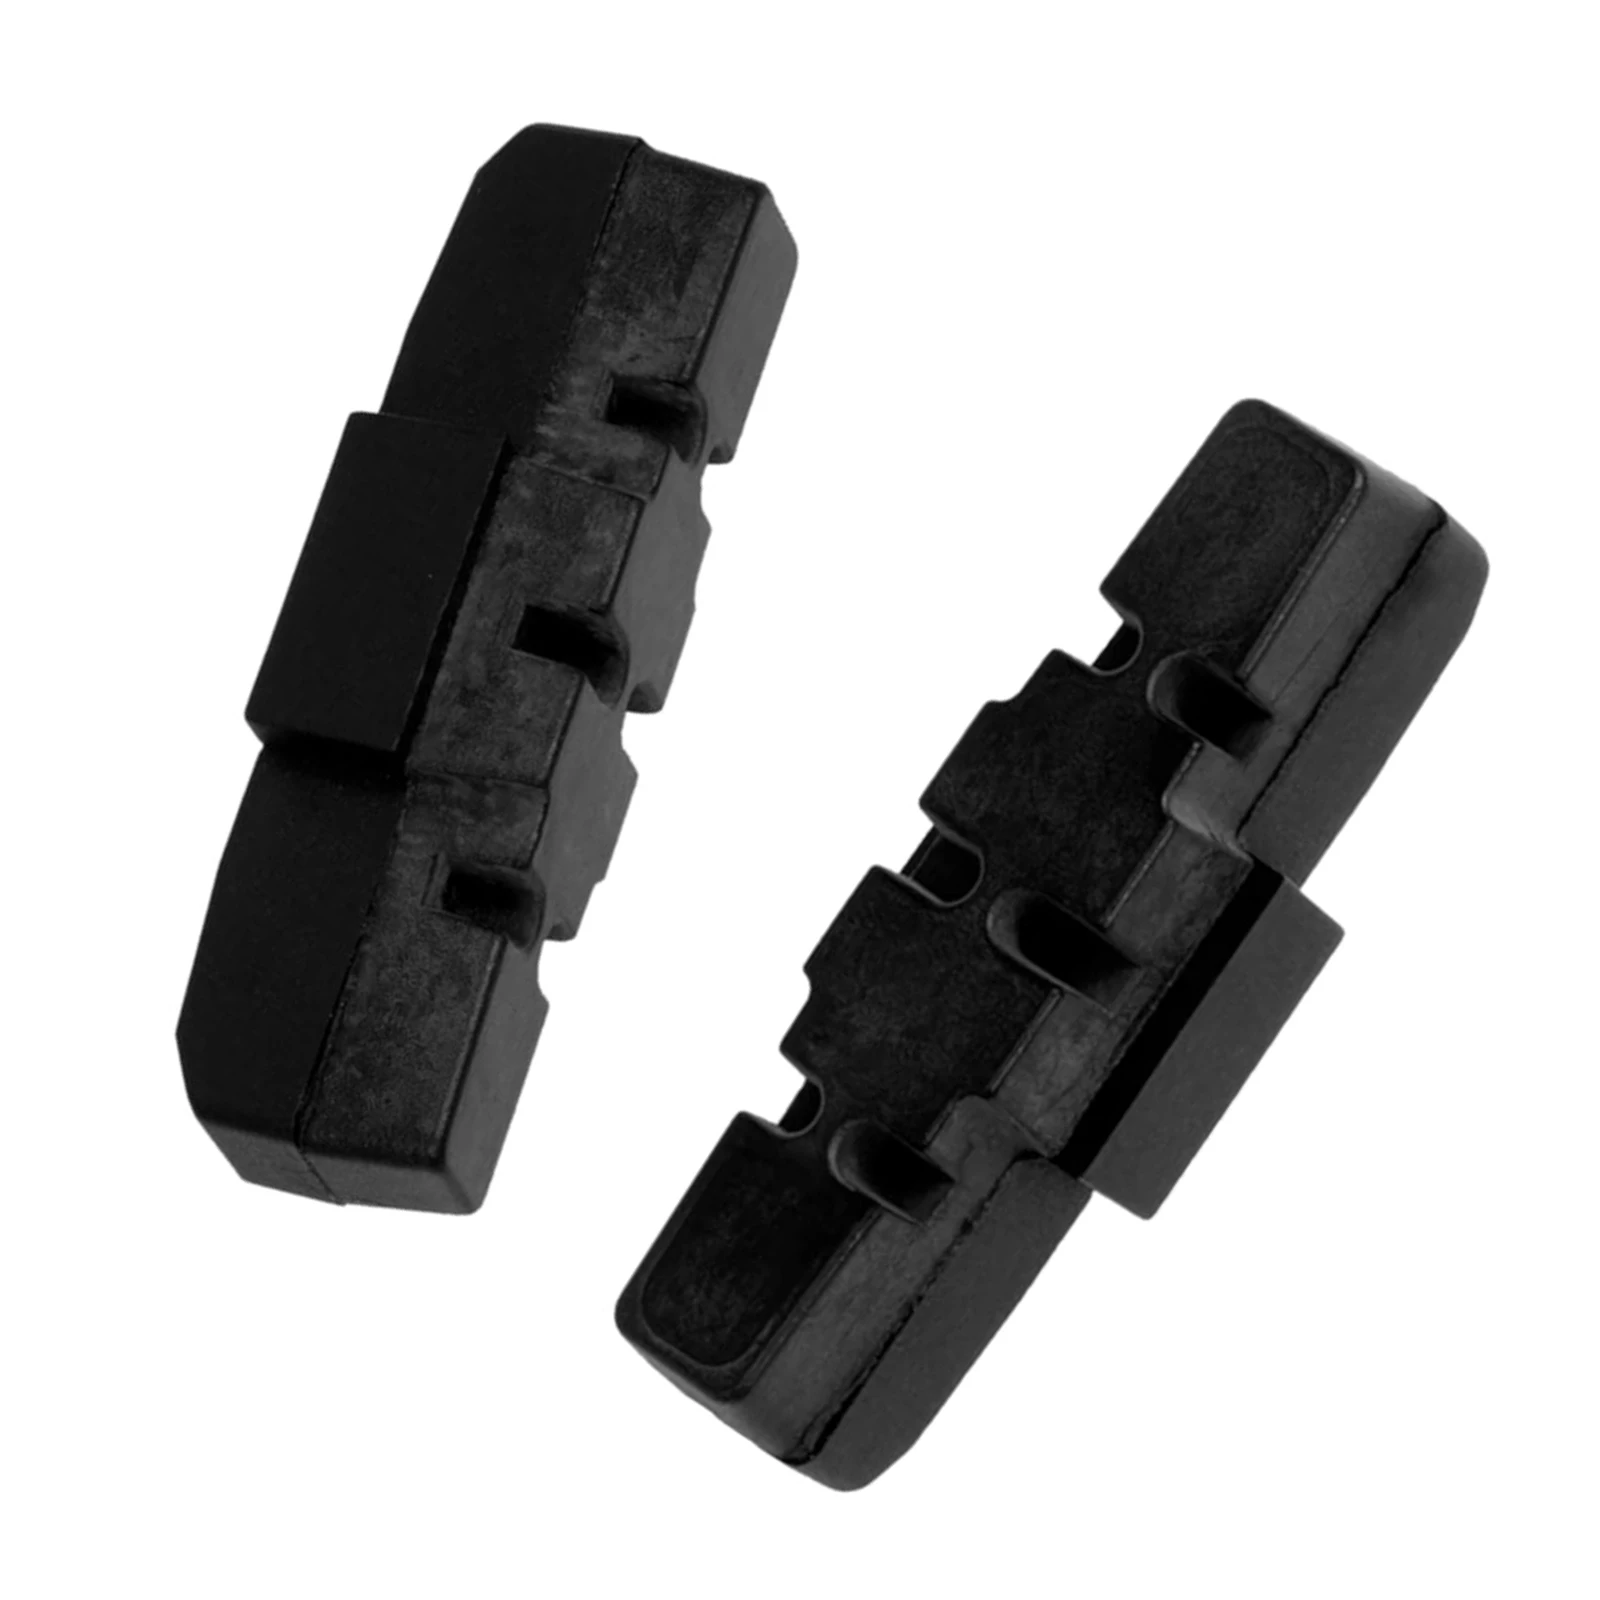 1 Pair Brake Shoe Bicycle Brake Pads System Bracket R1ubble For Magura  HS11/ HS22/ HS33 50mm Firmtech For Cycling Accessories